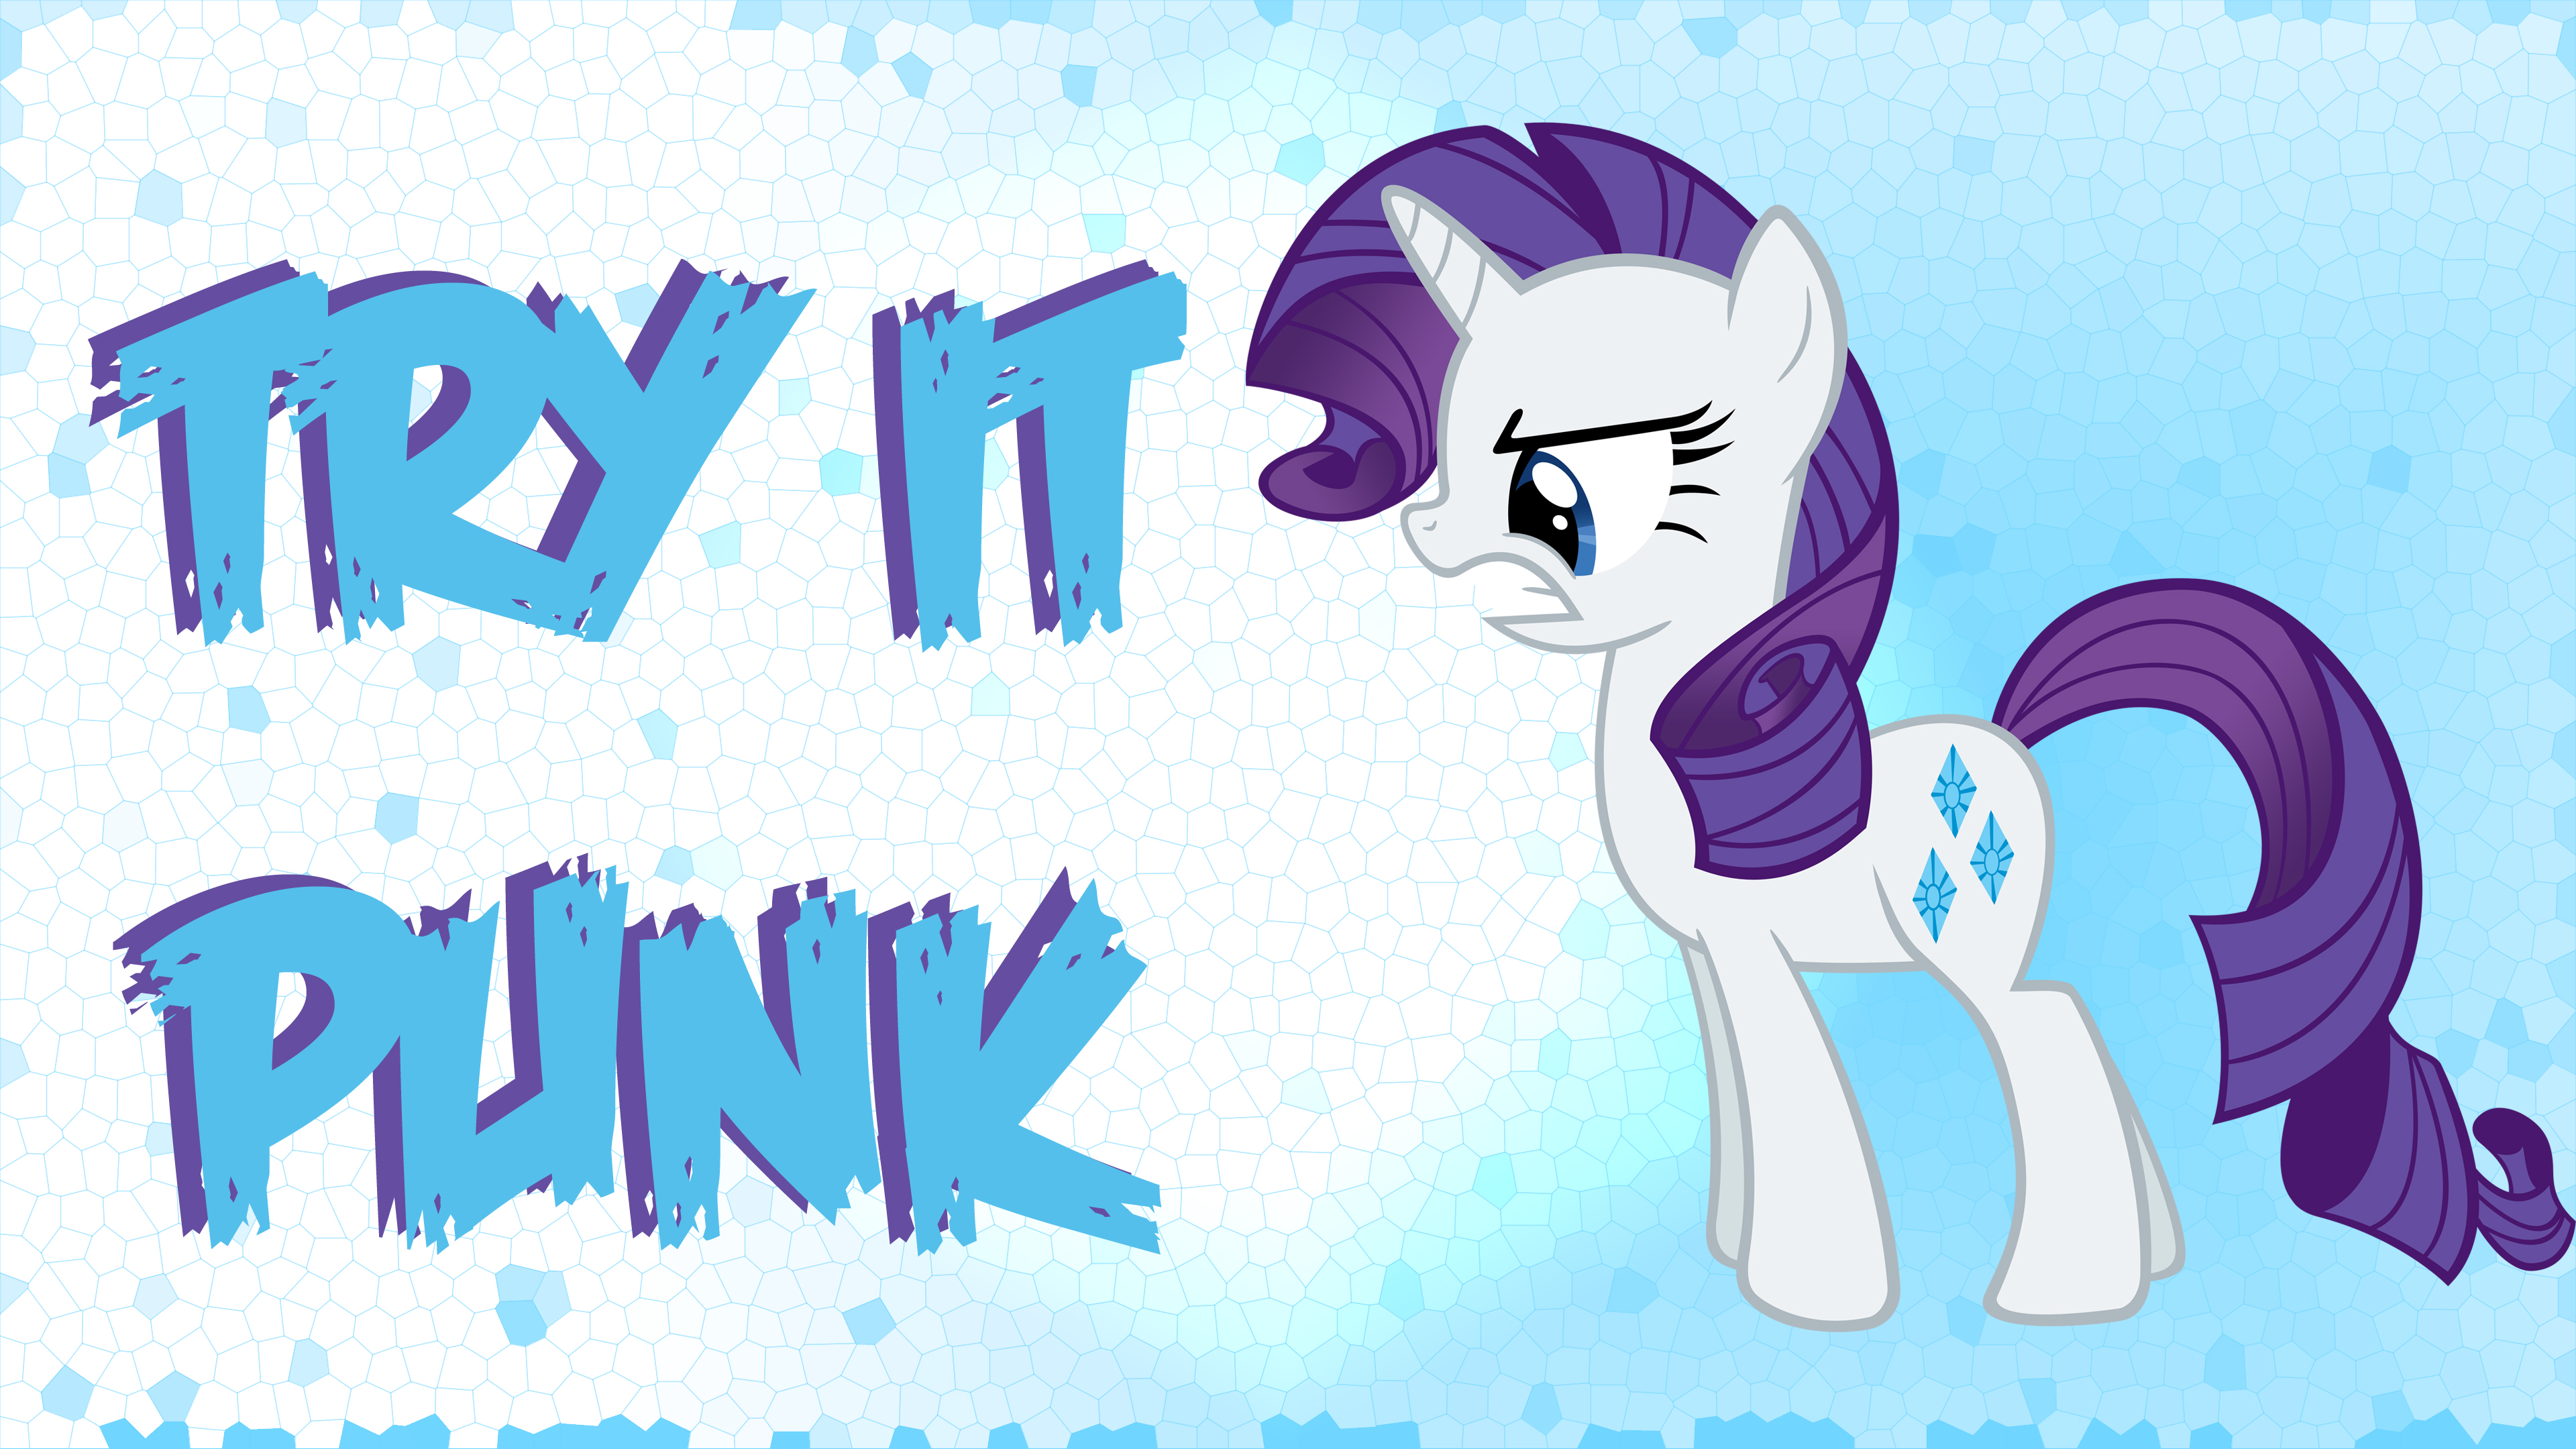 Try It Punk ! by aleksa0rs1 and MyLittlePinkieDash